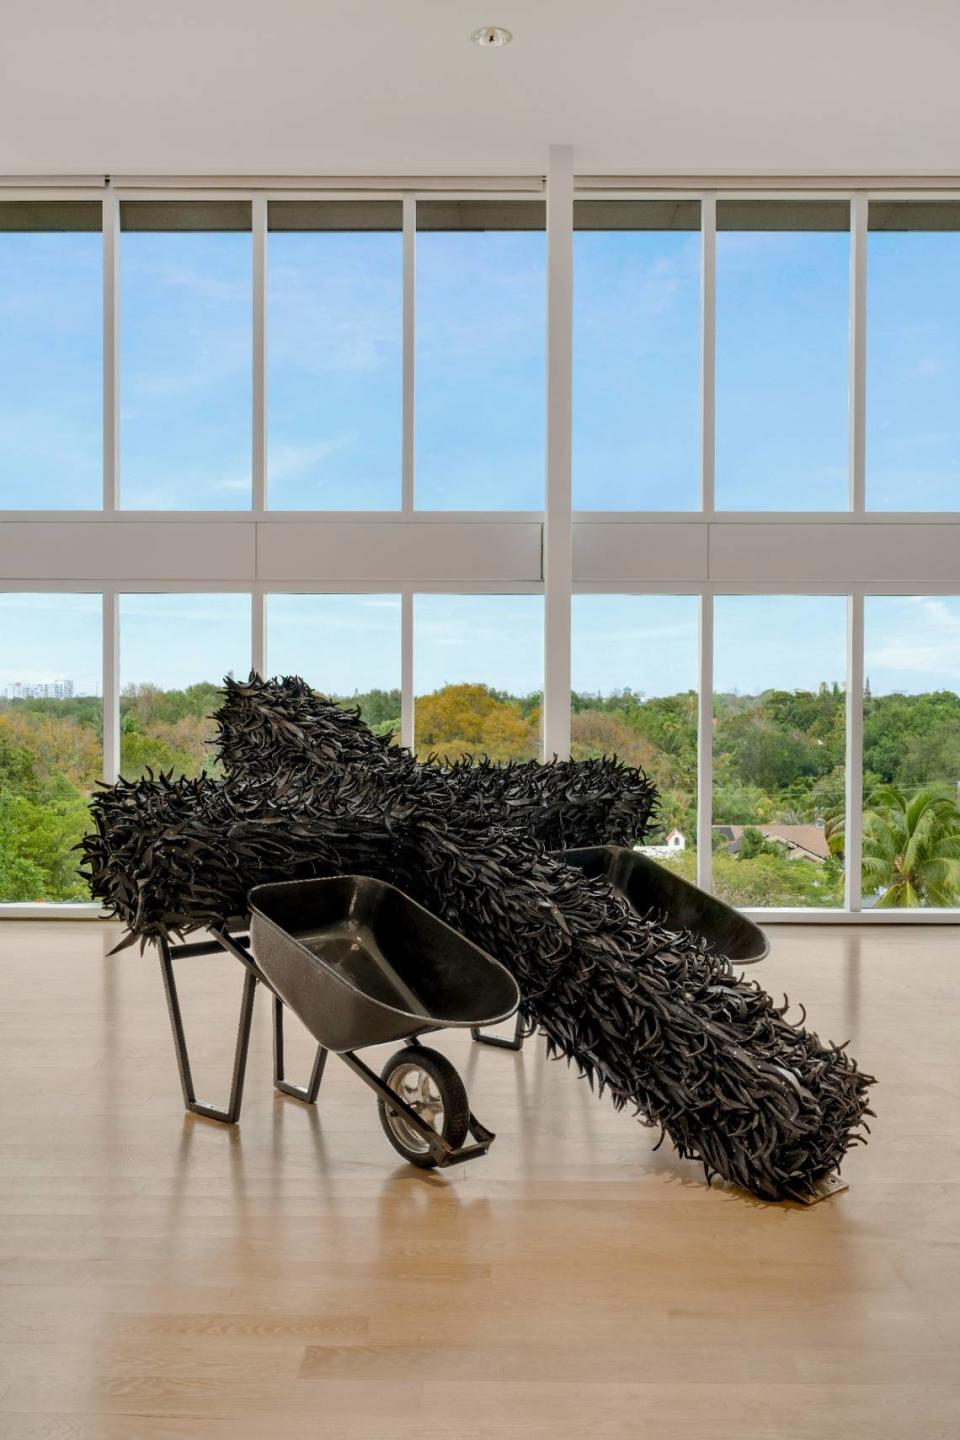 “Chakaia Booker: The Observance” runs through Oct. 31 at Institute of Contemporary Art - Miami.